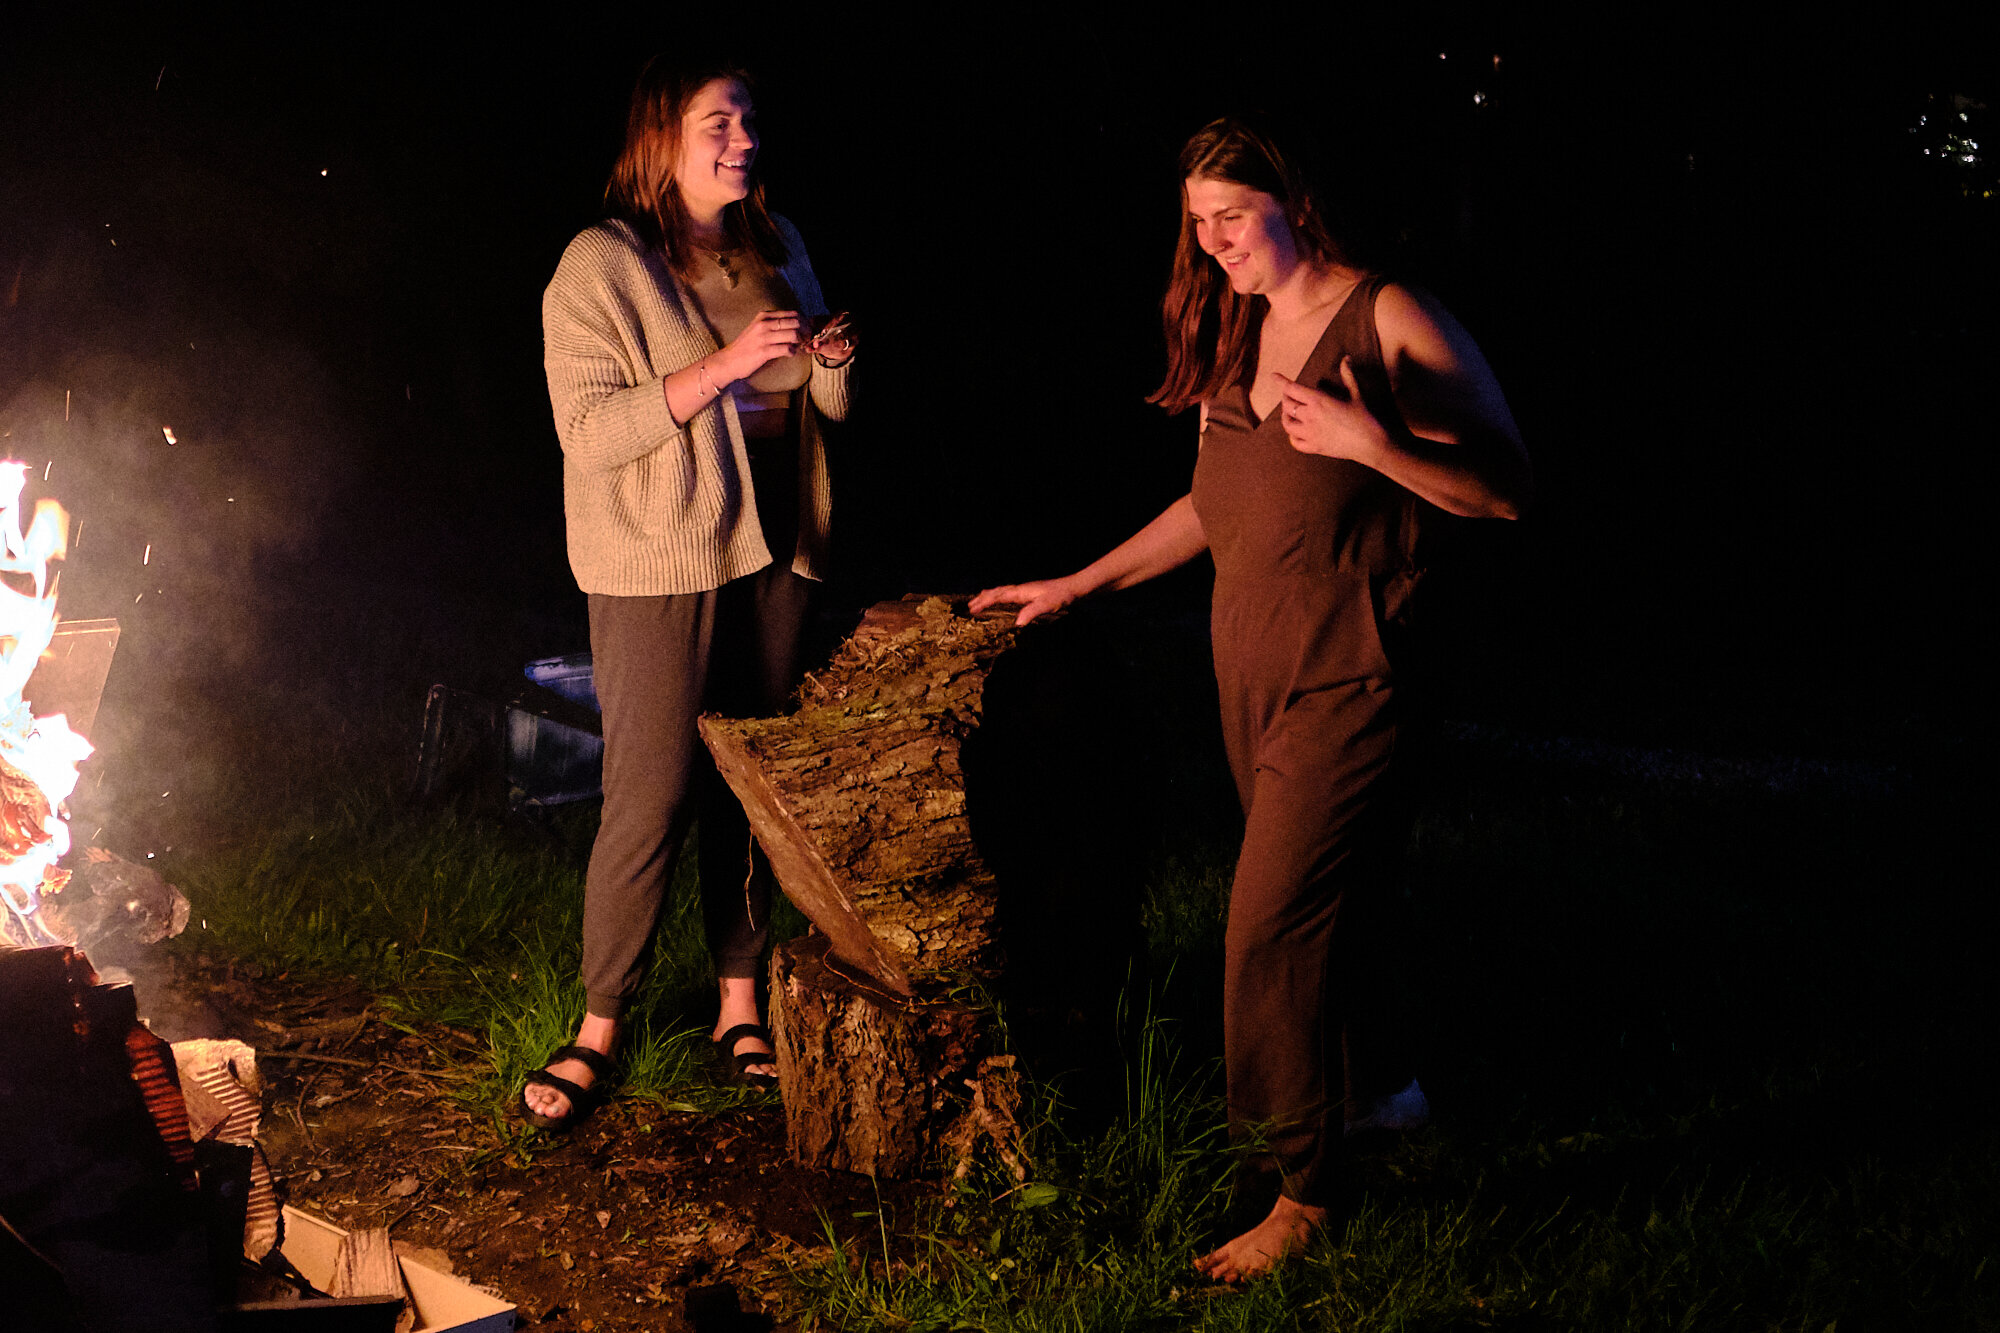  Hannah and Mel, giddy after having created a truly marvelous fire. | 5/14/20 Athens, OH 